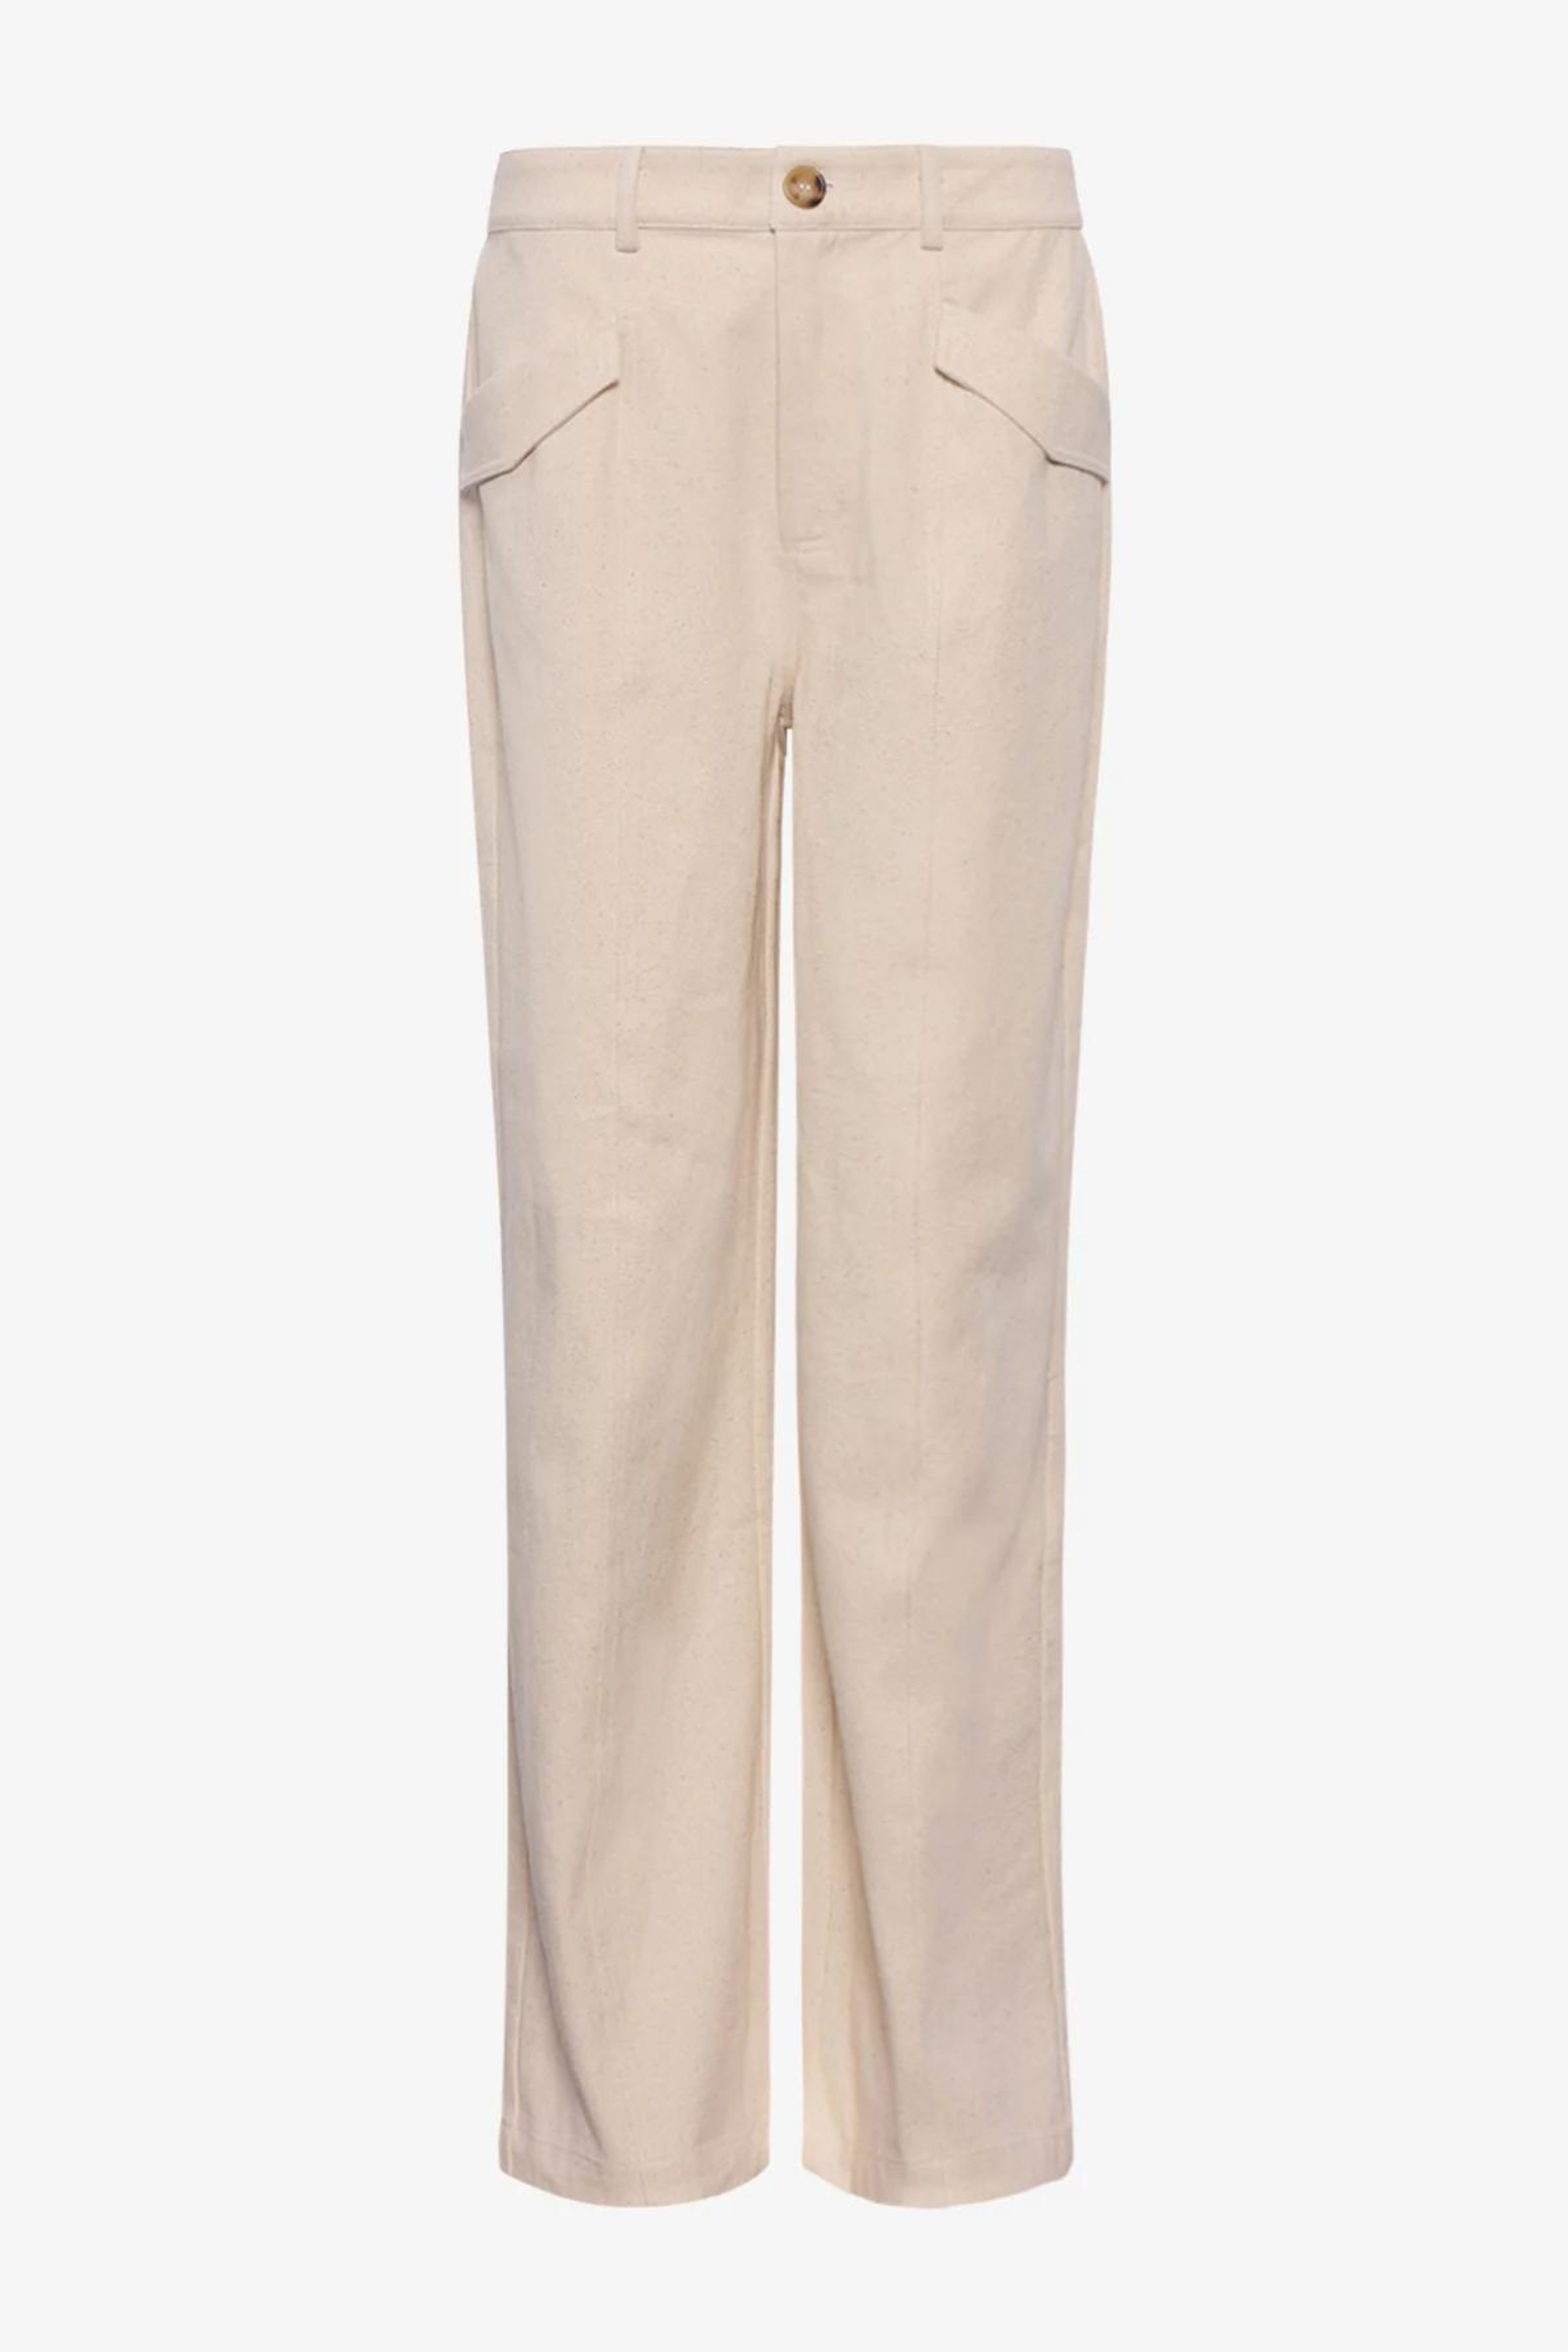 STORMY PANT - IVORY